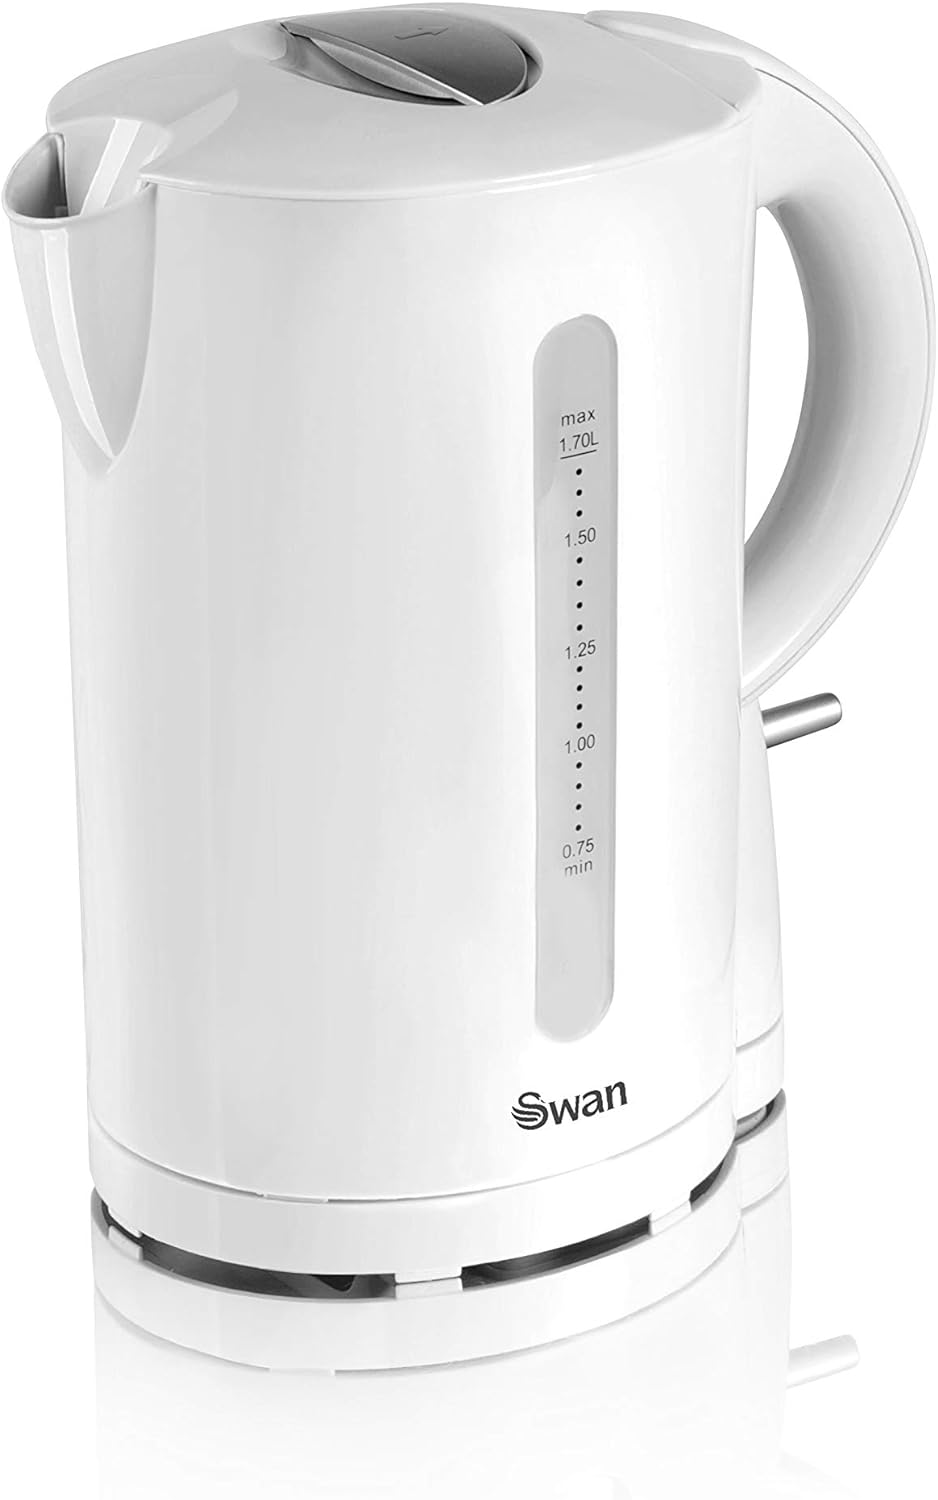 Swan SK18121N Jug Kettle with Rapid Boil, Detachable Filter, 1.7L, 2200W, White - Amazing Gadgets Outlet